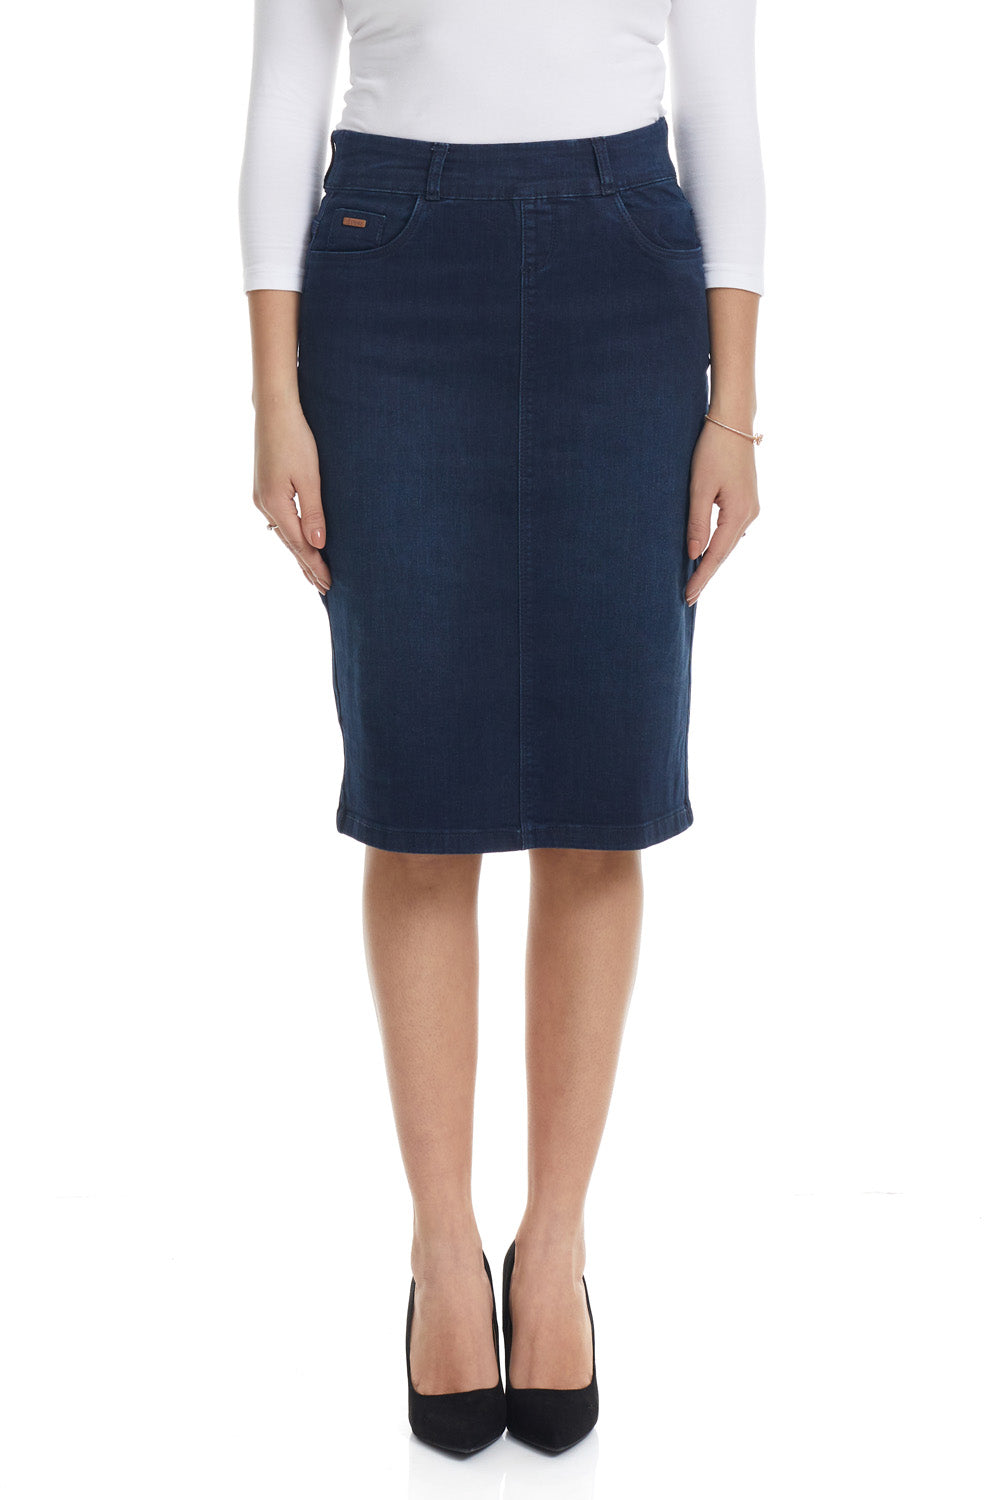 modest blue below knee length straight jean skirt with front and back pockets